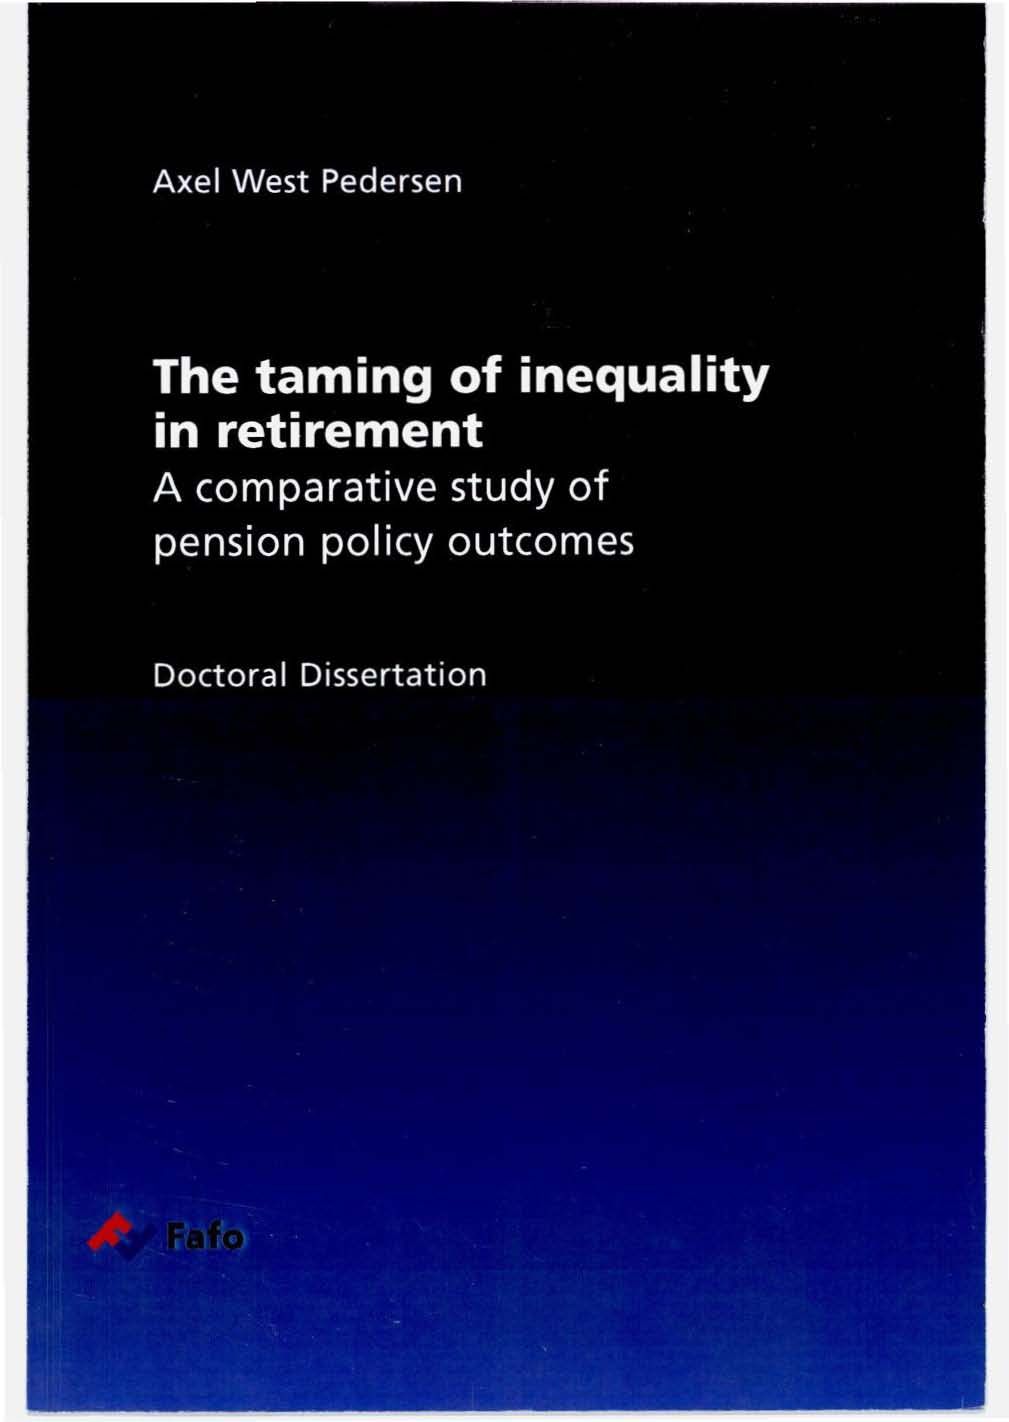 The taming of inequality in retirement